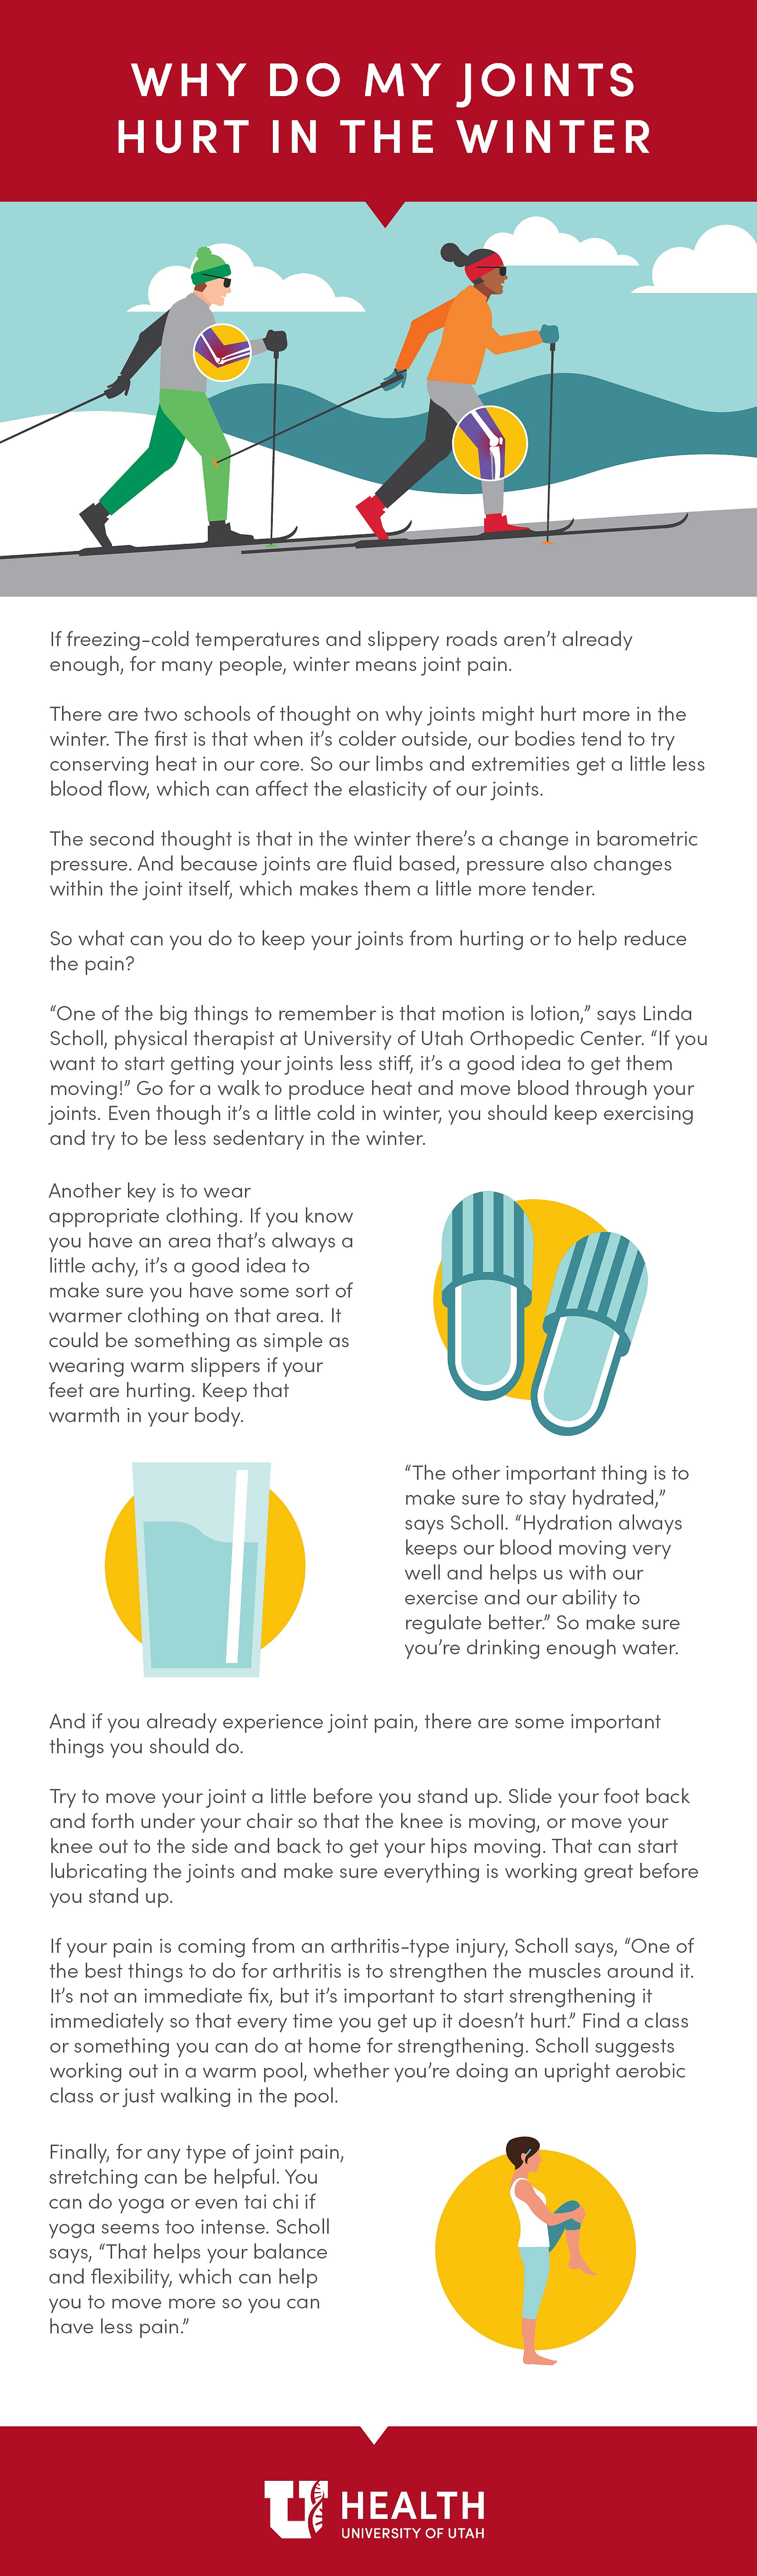 Joints in the winter infographic